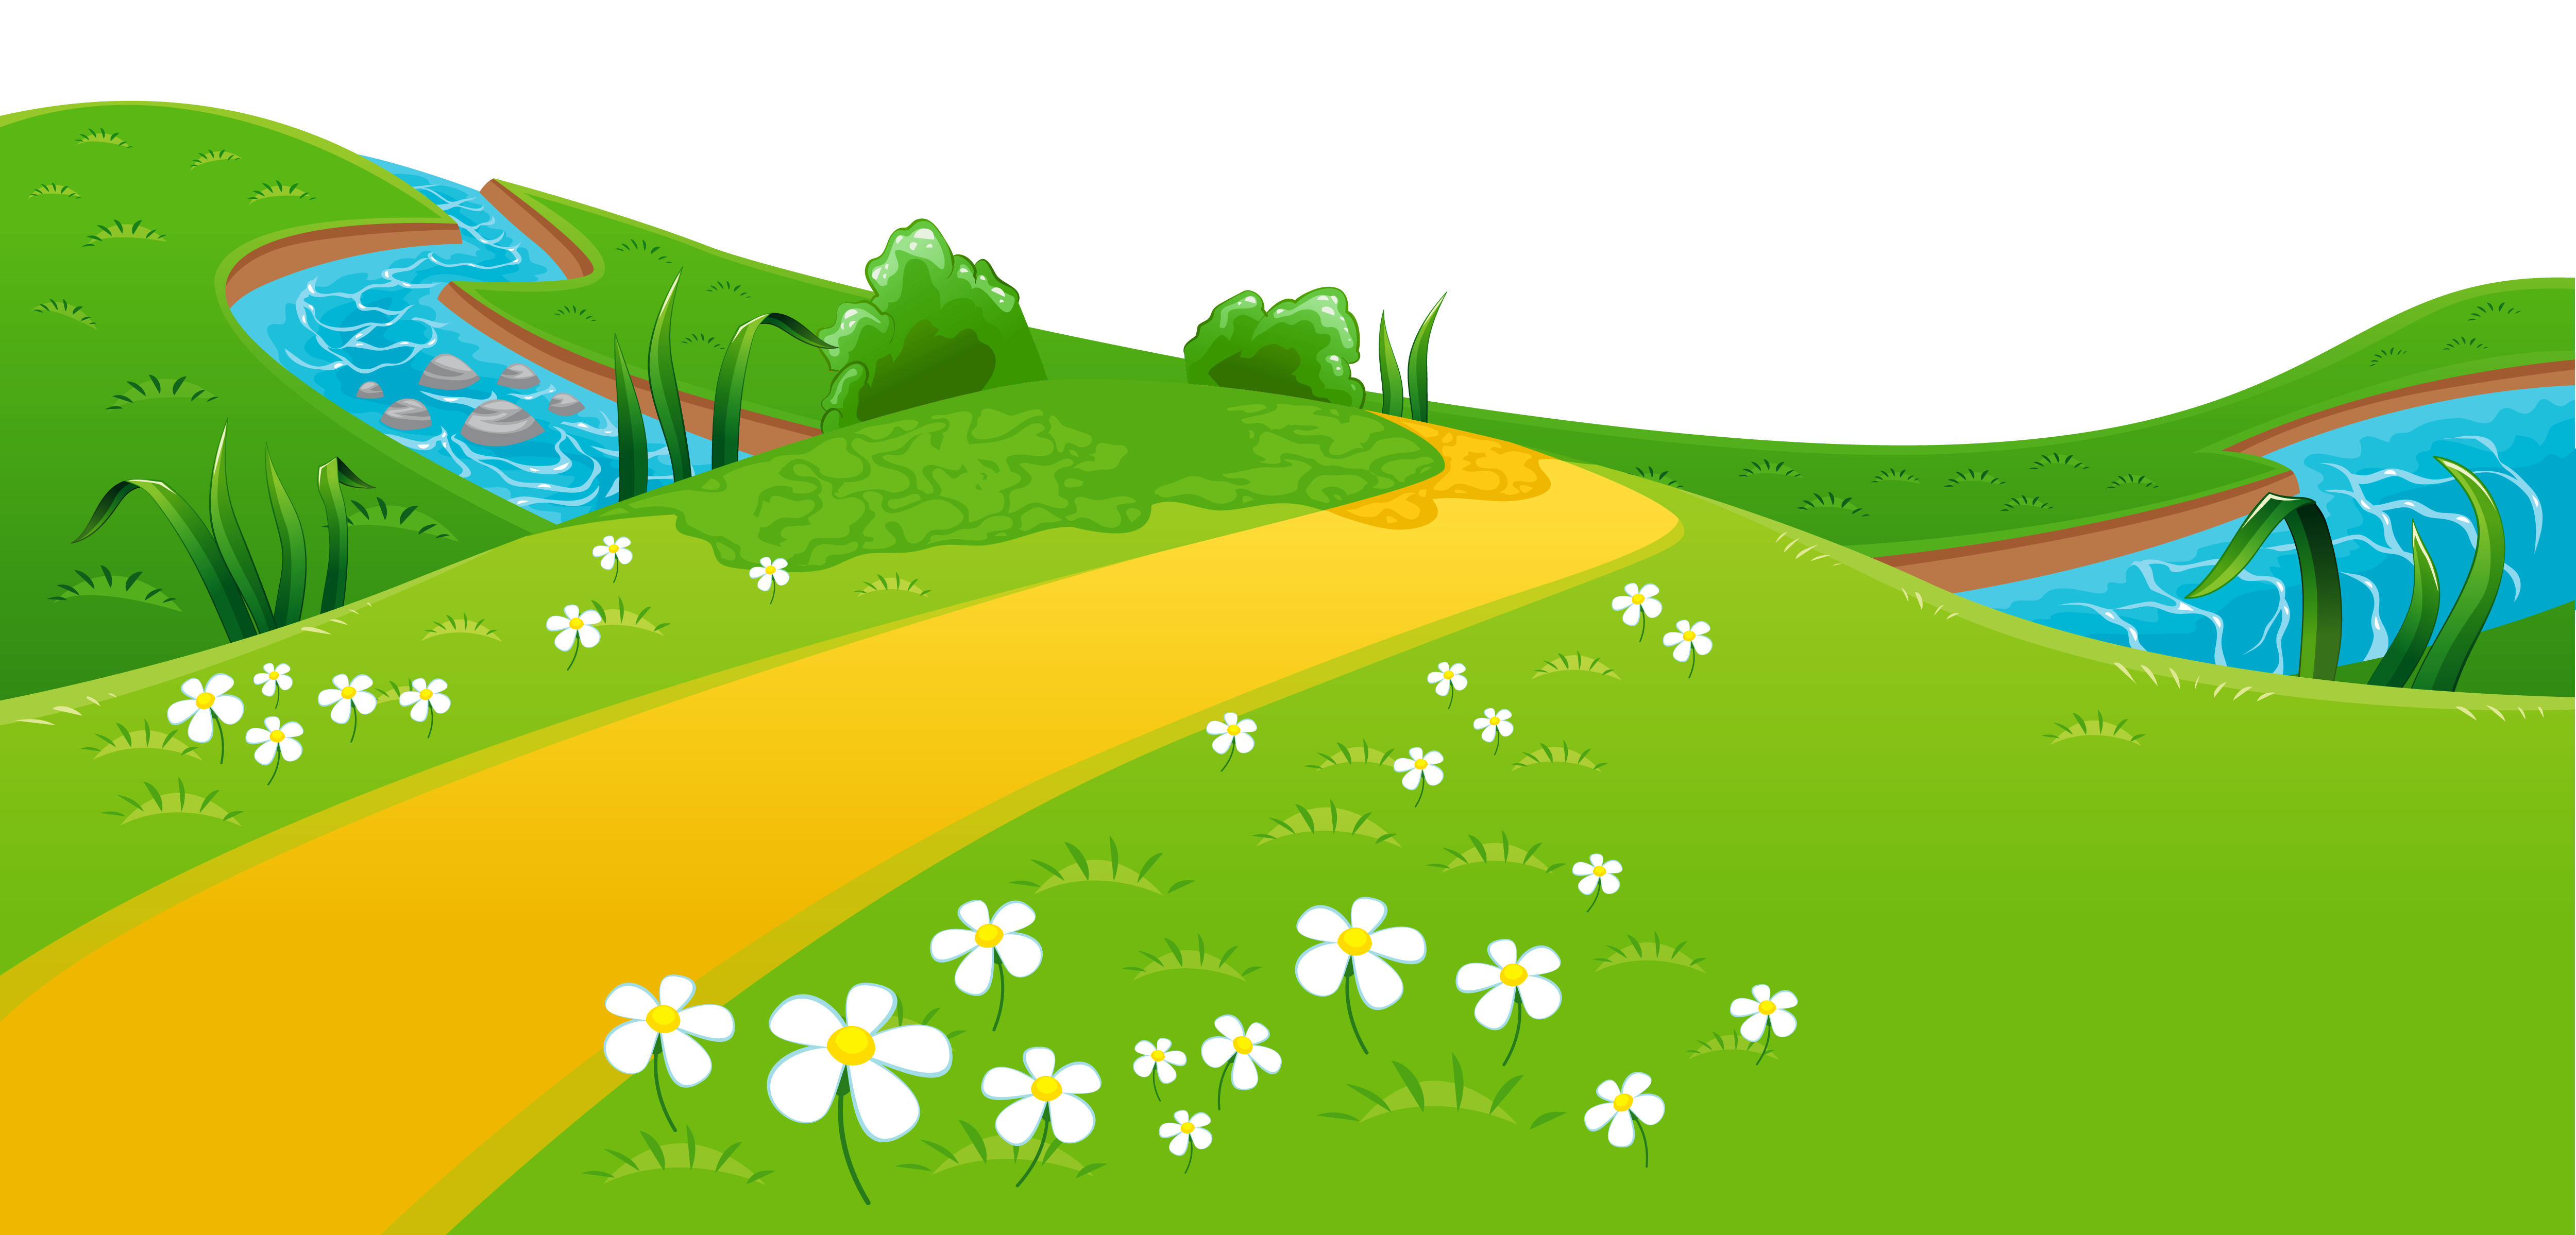 Mountain clipart ground. Meadow and river png